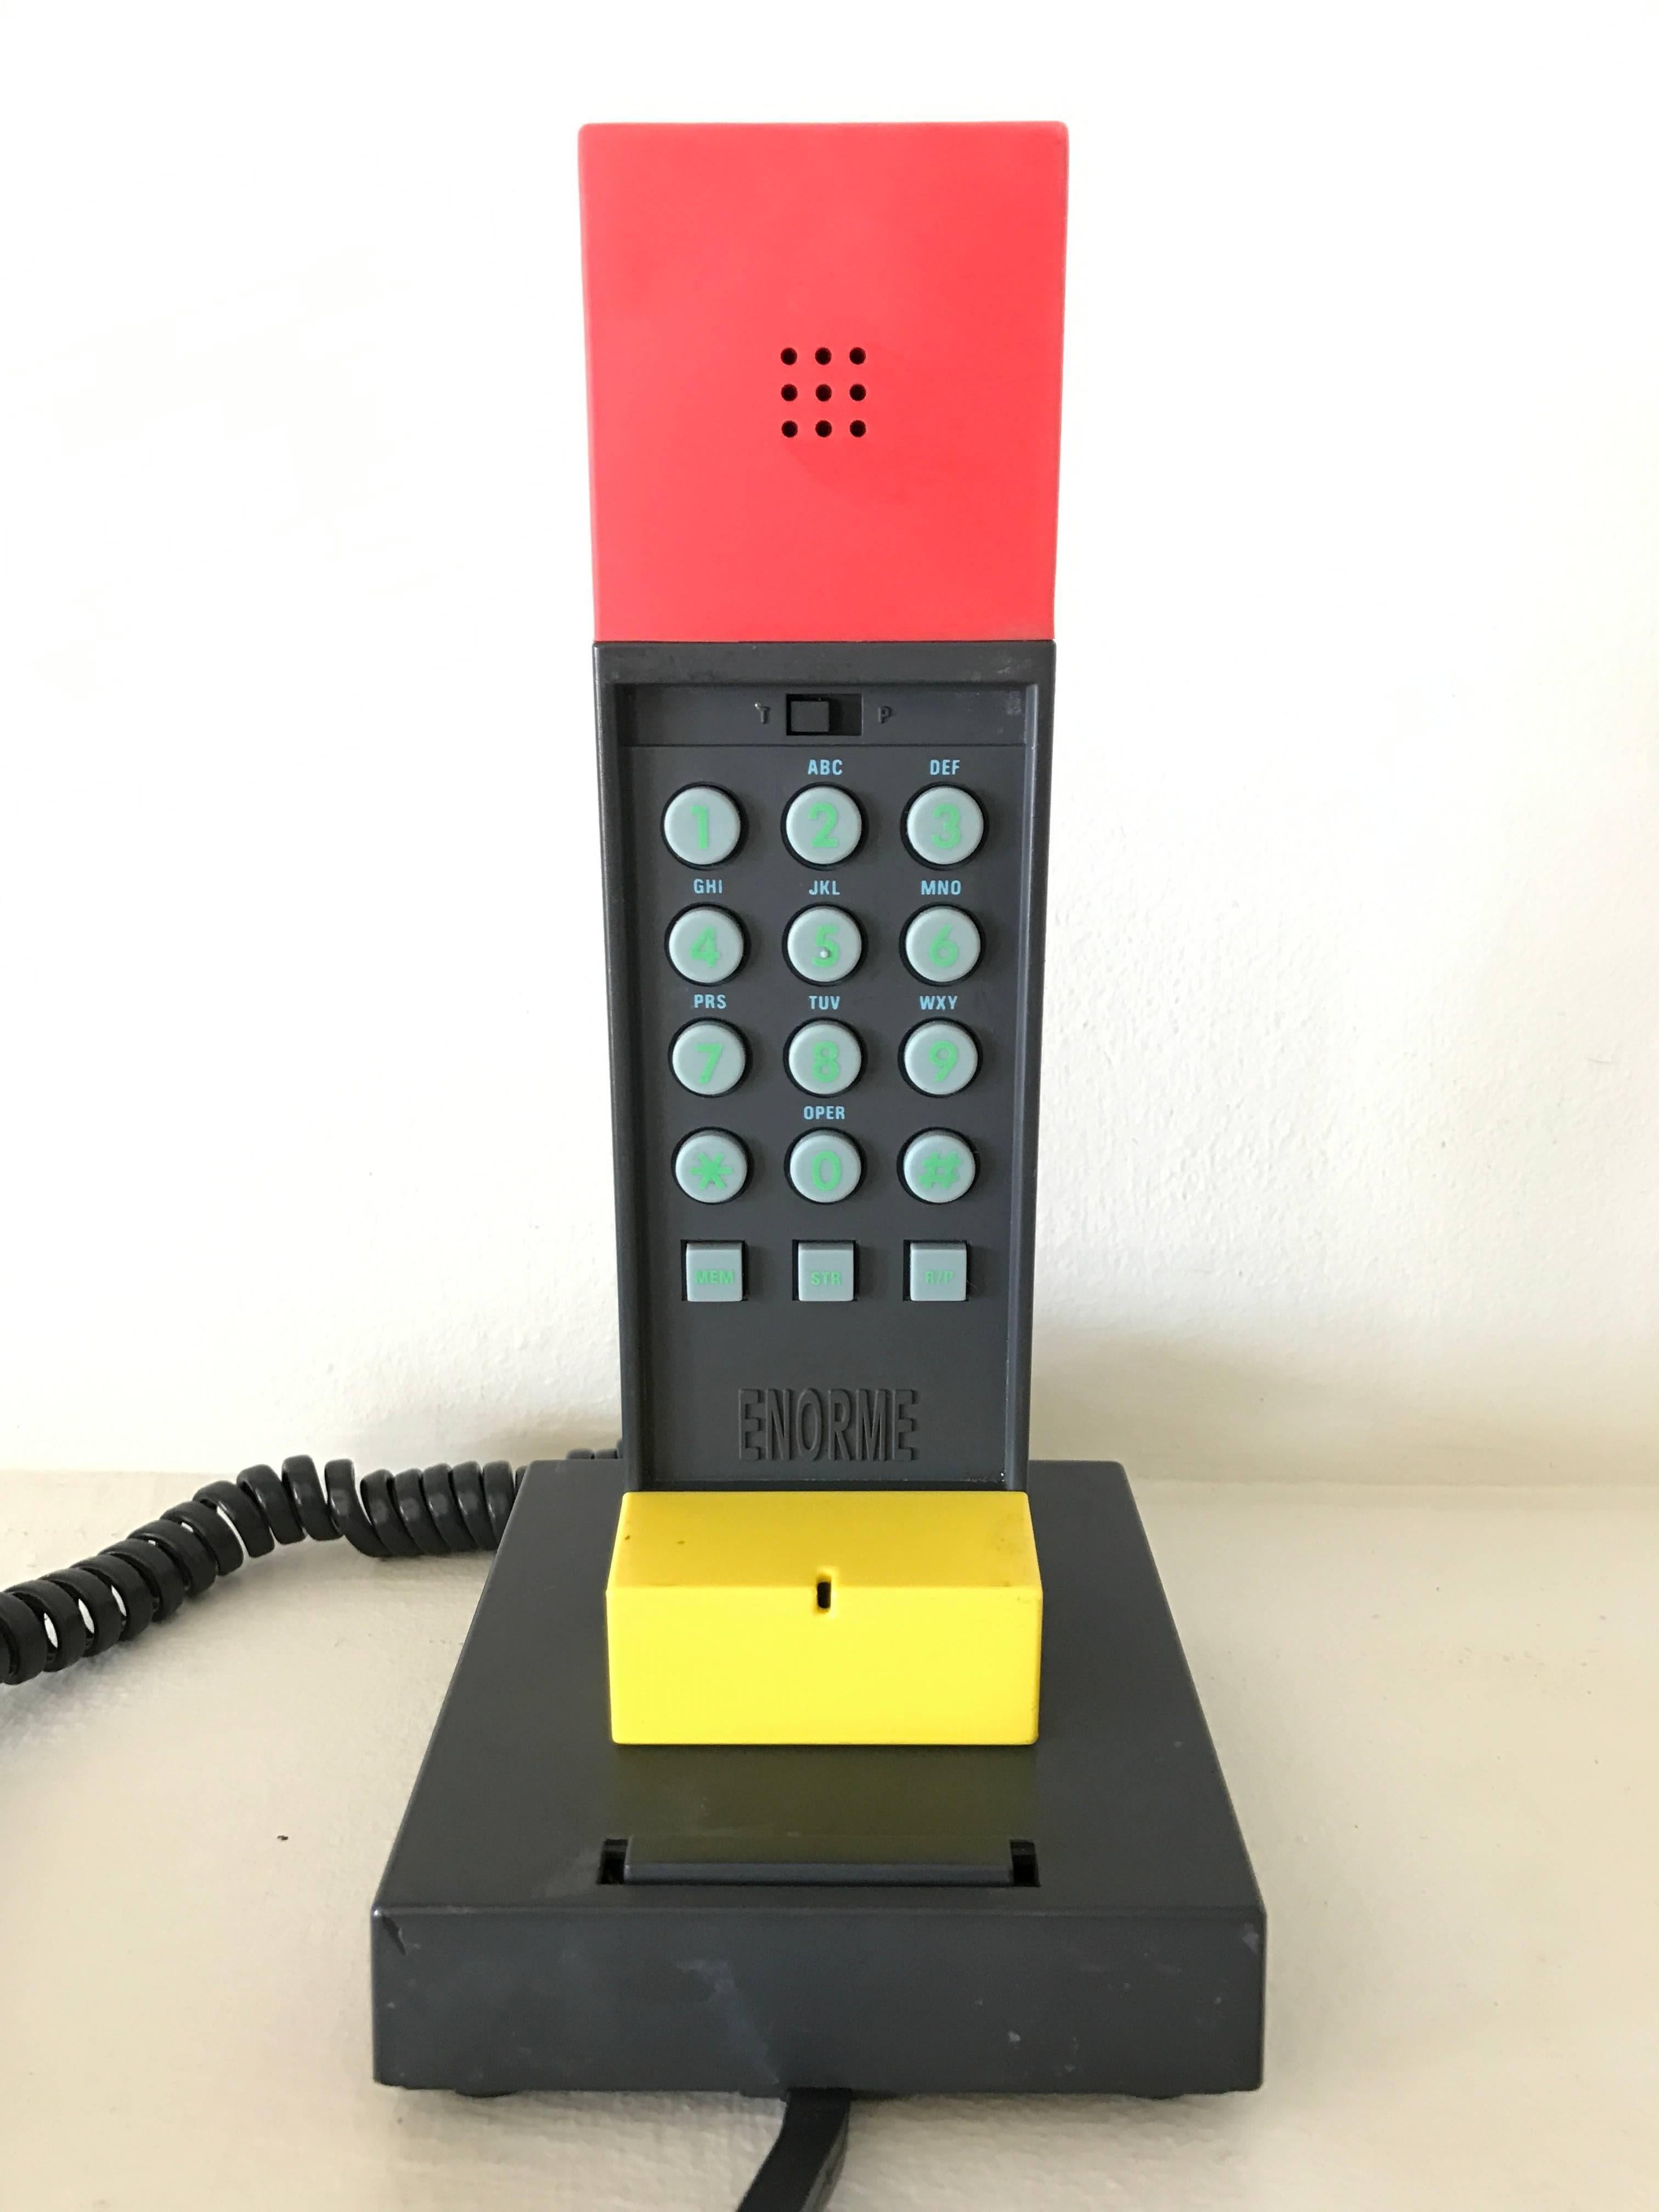 Original enorme phone in black, red and yellow designed by Ettore Sottsass for Sottsass Associati and Brondi Telephonia S.p.A. Phone has been tested and works.